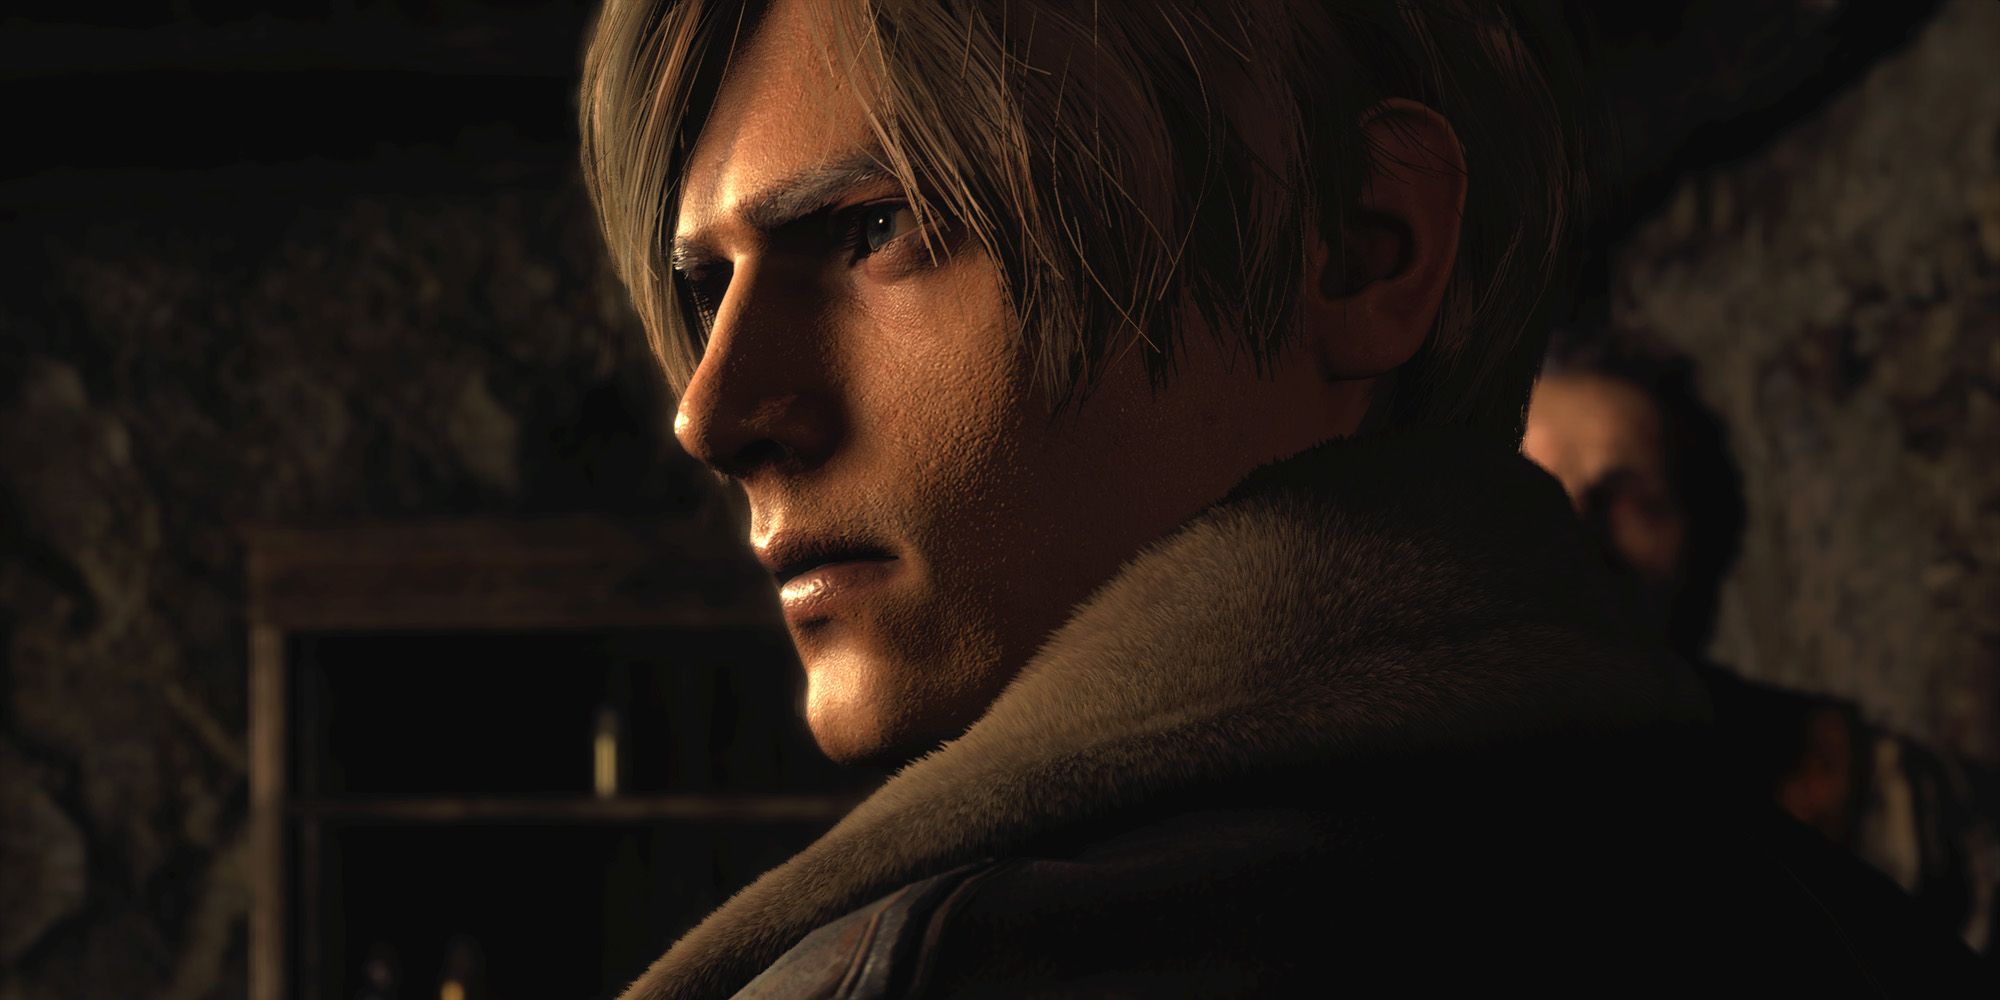 How to get the TMP in Resident Evil 4 Remake Demo